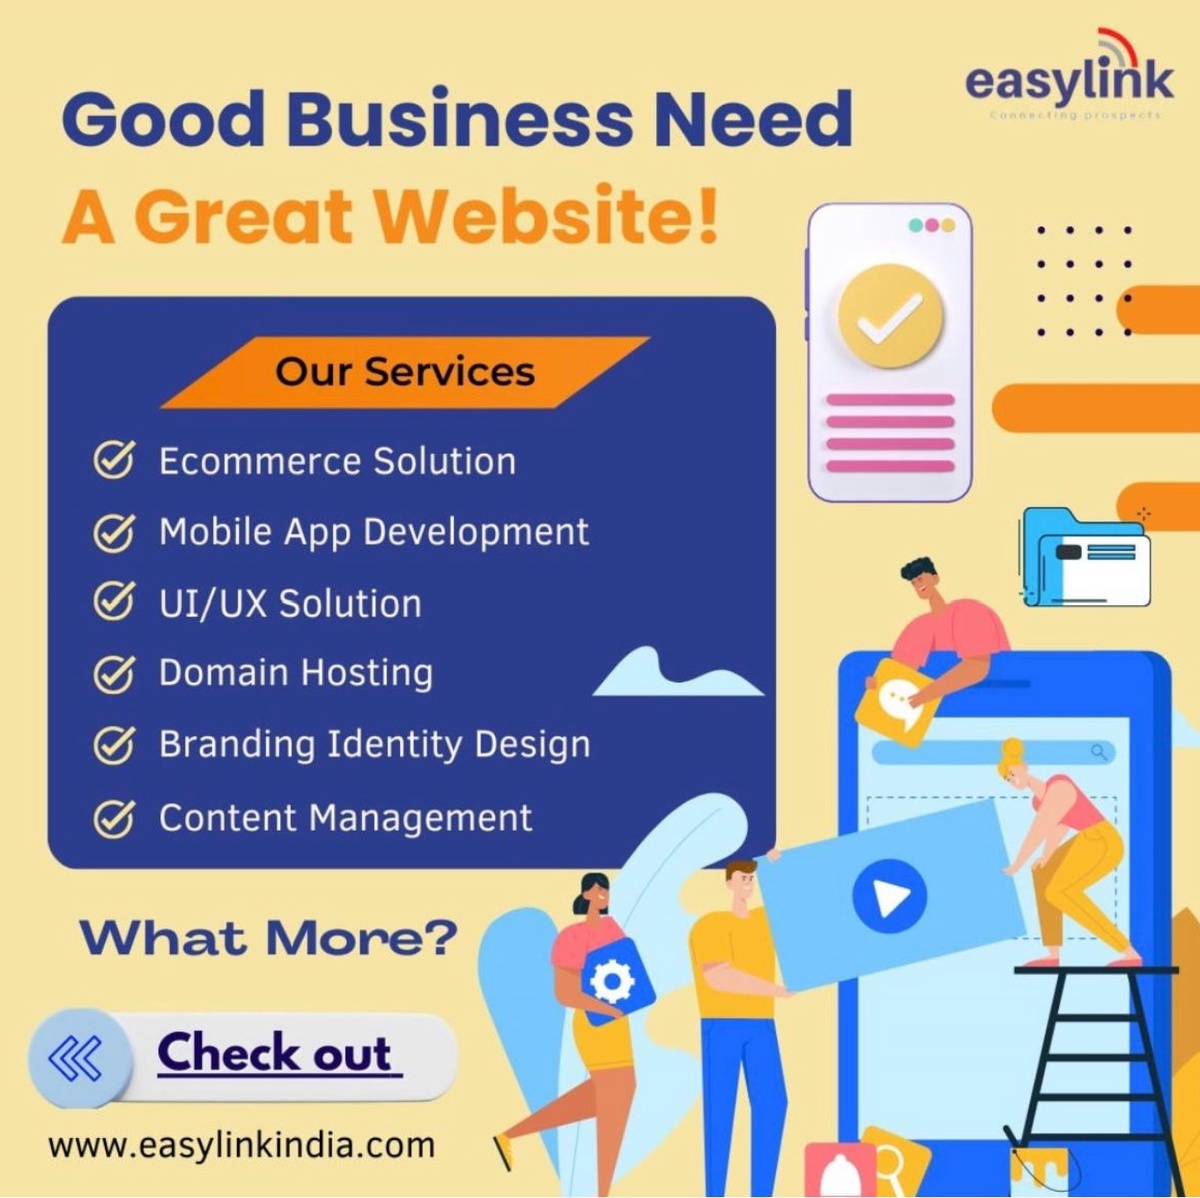 Are you looking to build a stunning website for your business? Easylink can help you create  website